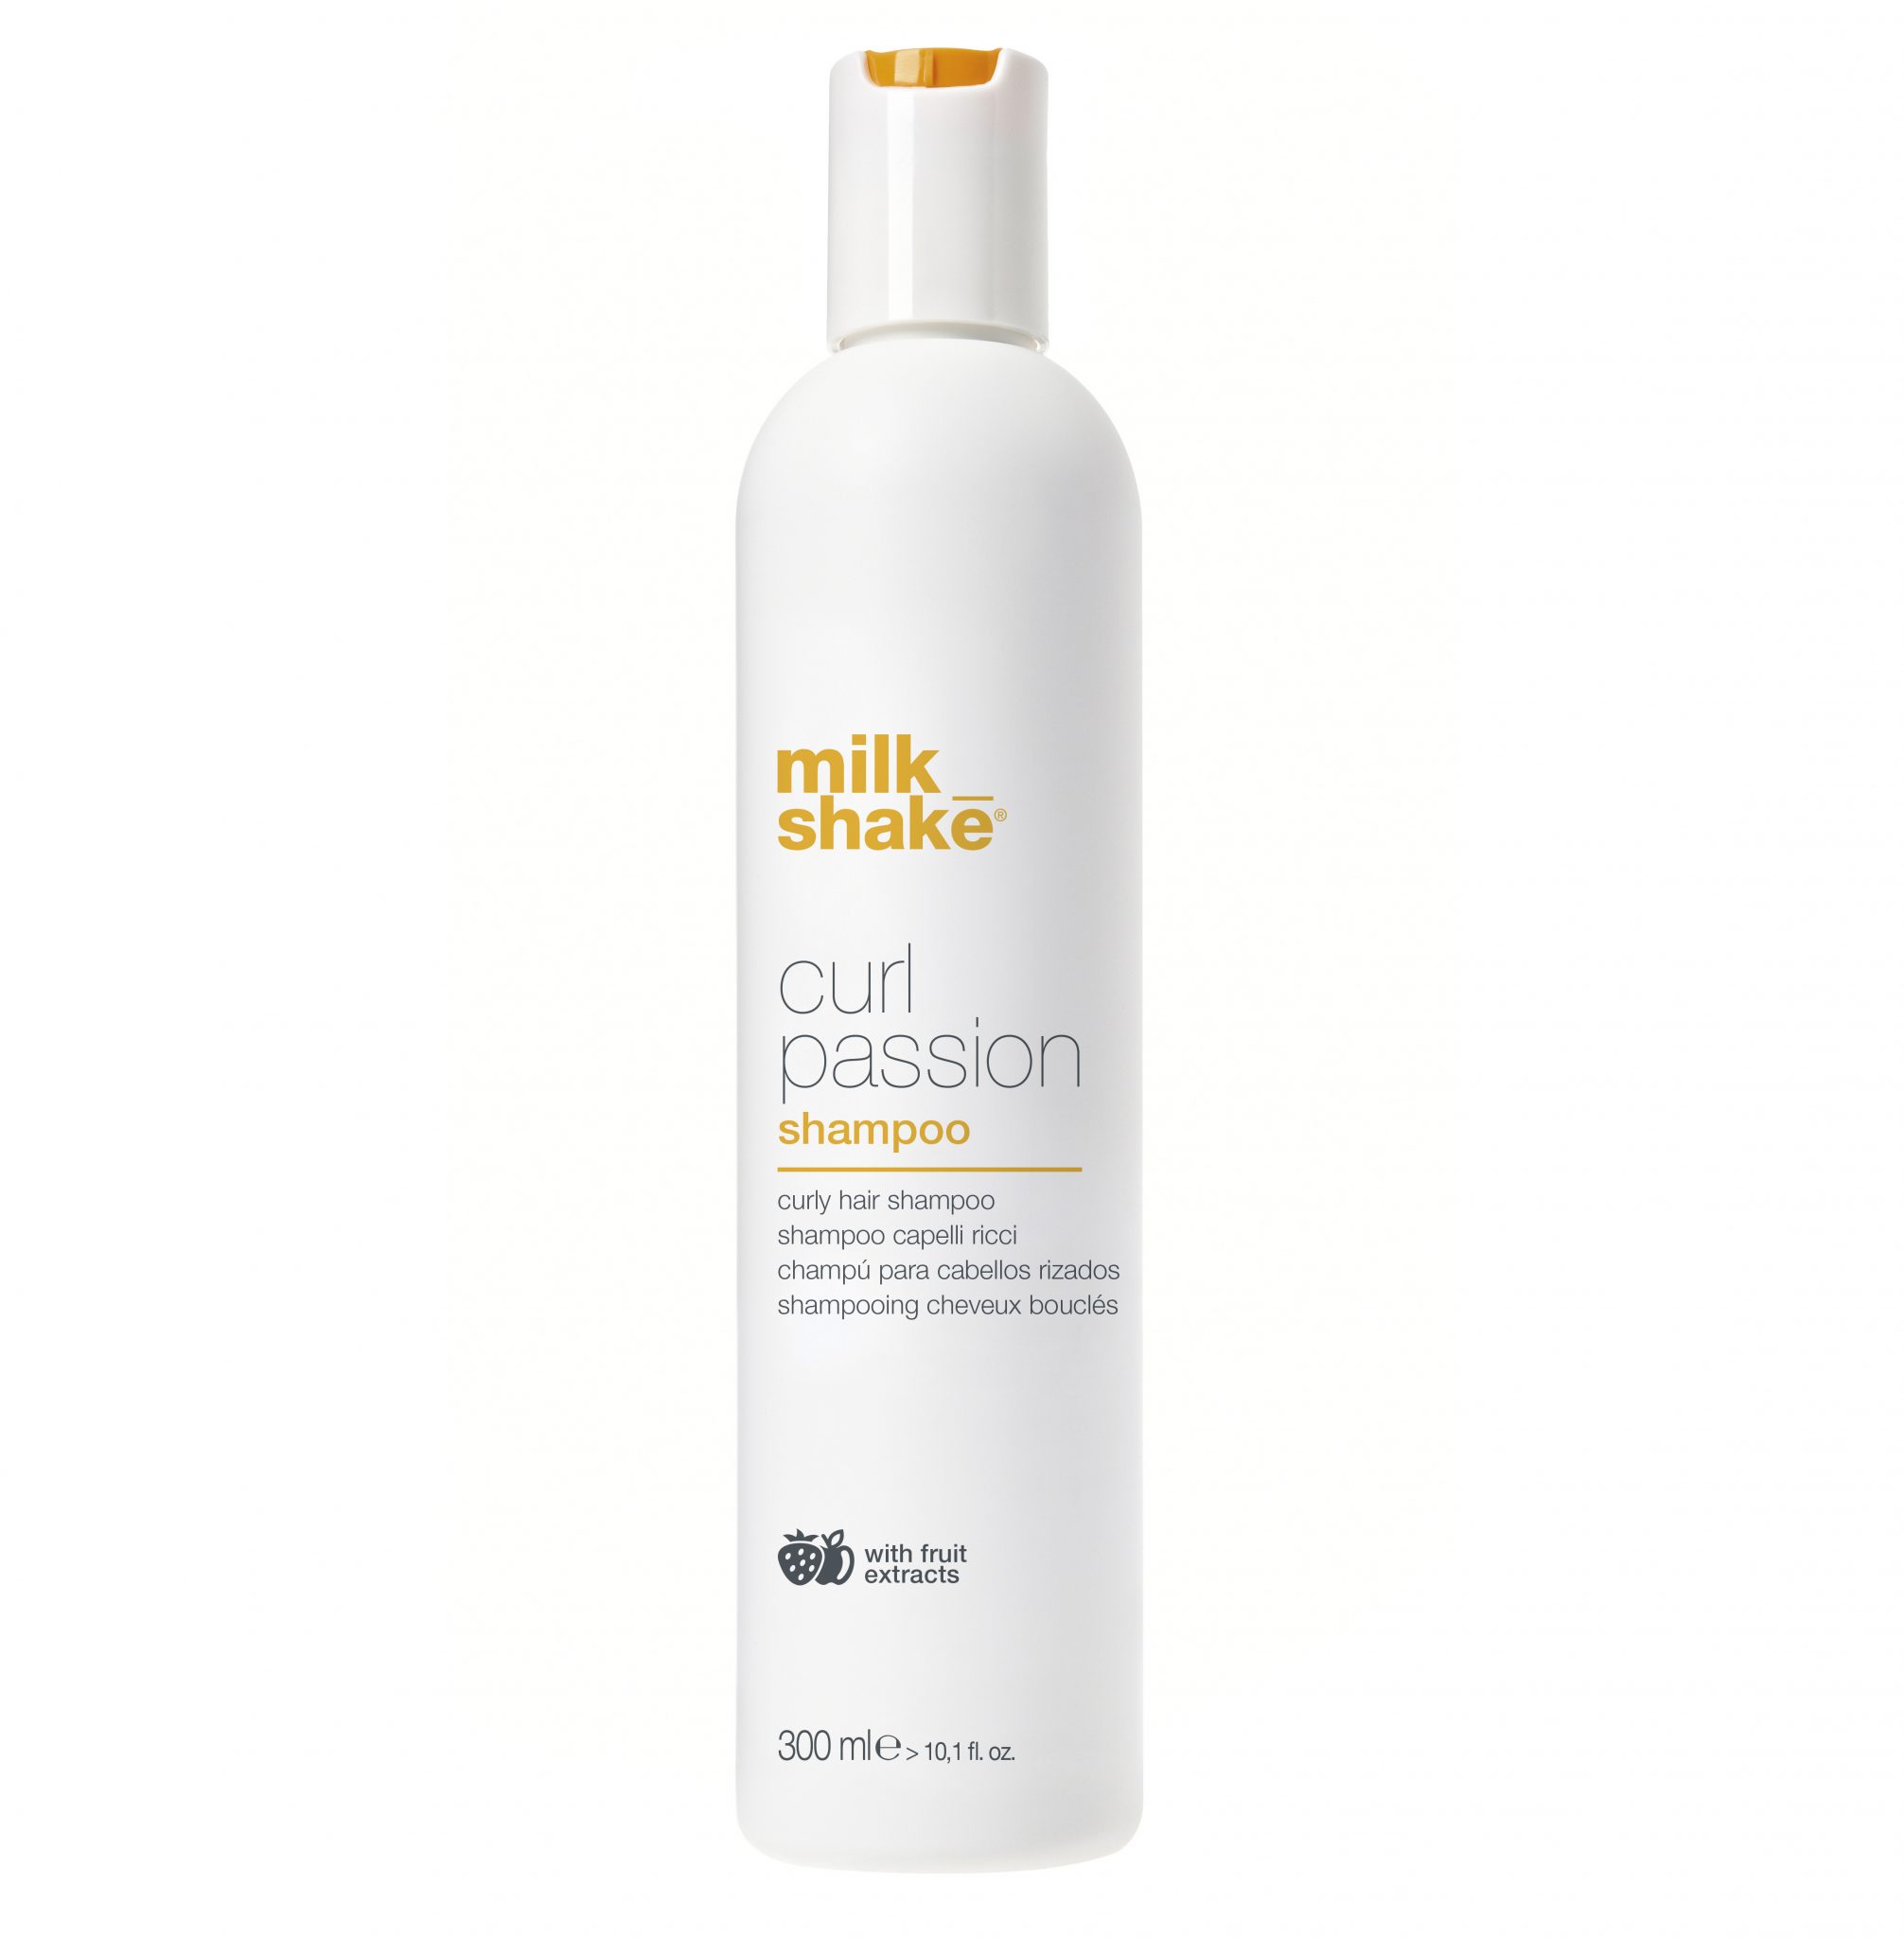 Milk Shake Curl Shampoo 300ml - Hair products New Zealand | Nation wide hairdressing & hair care